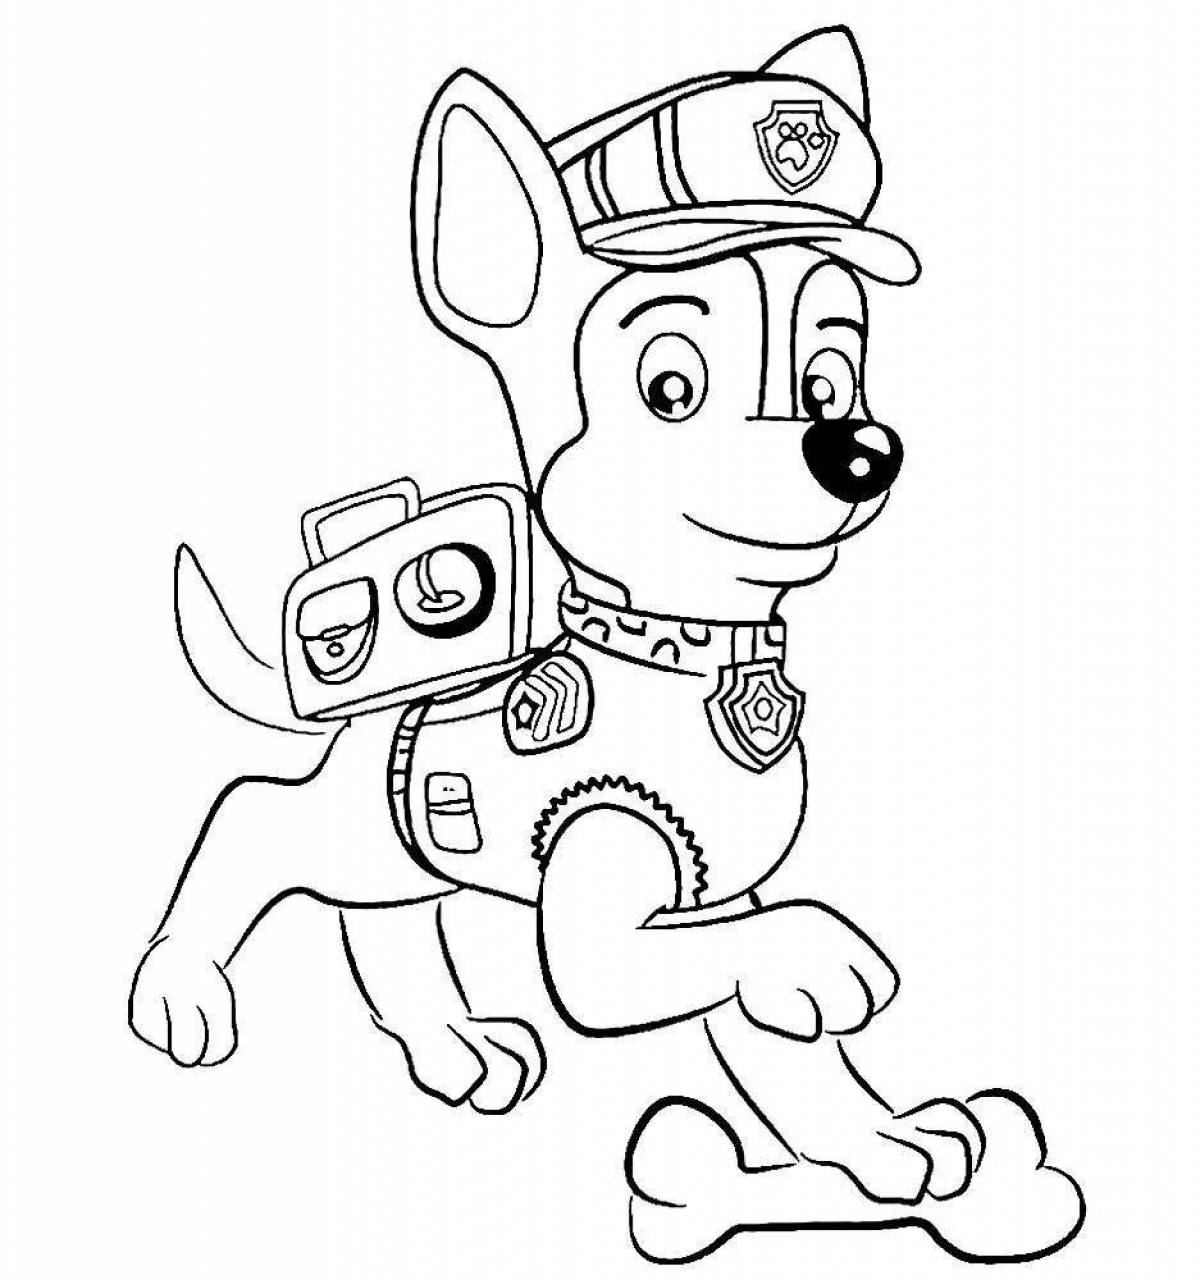 Playful racer coloring page for kids